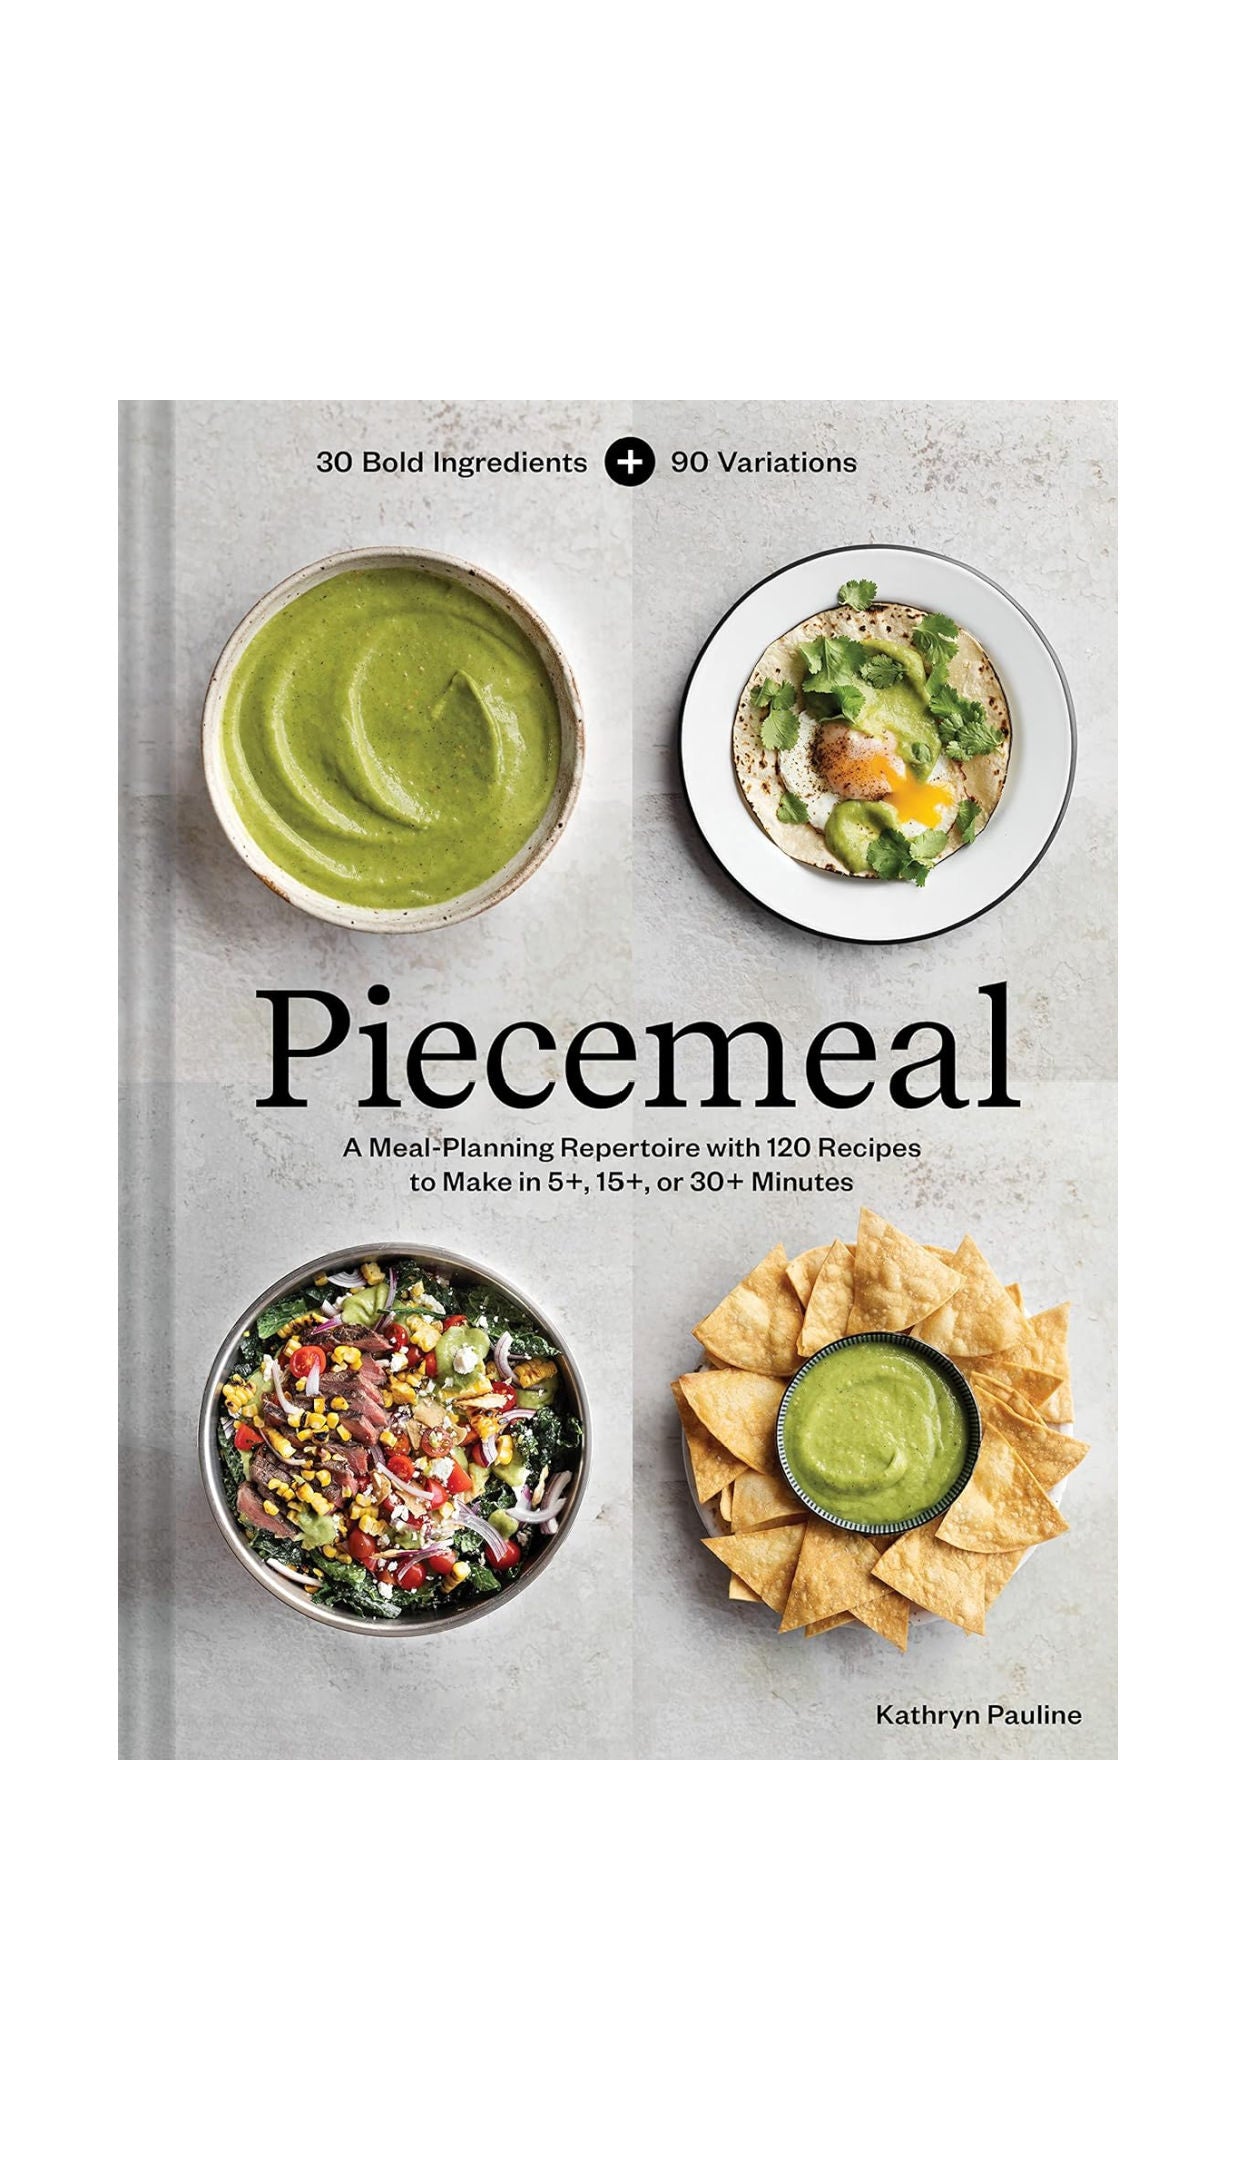 Piecemeal: A Meal-Planning Repertoire